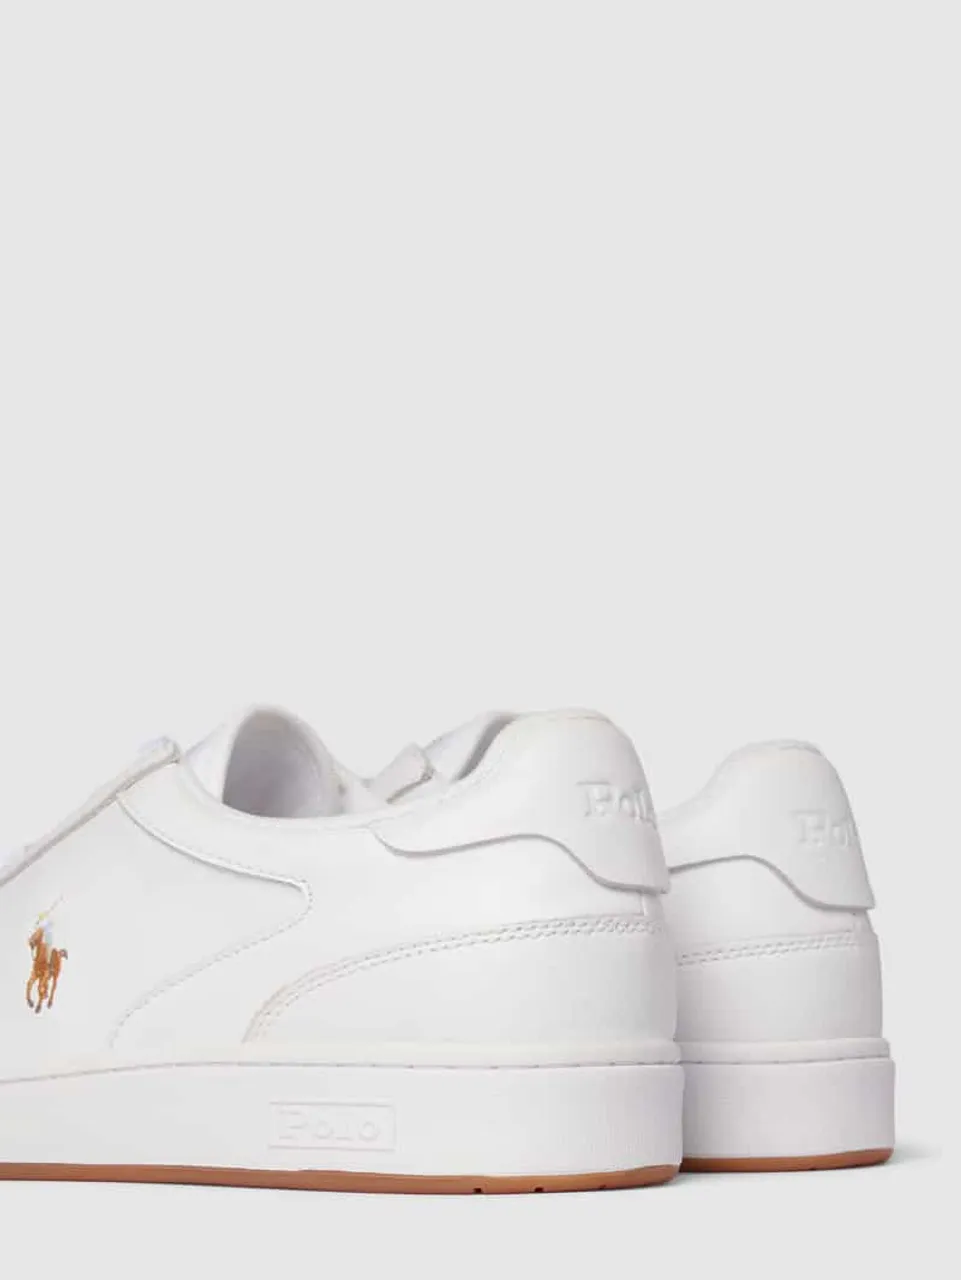 Polo Ralph Lauren Sneaker mit Label-Stitching Modell 'POLO' in Weiss